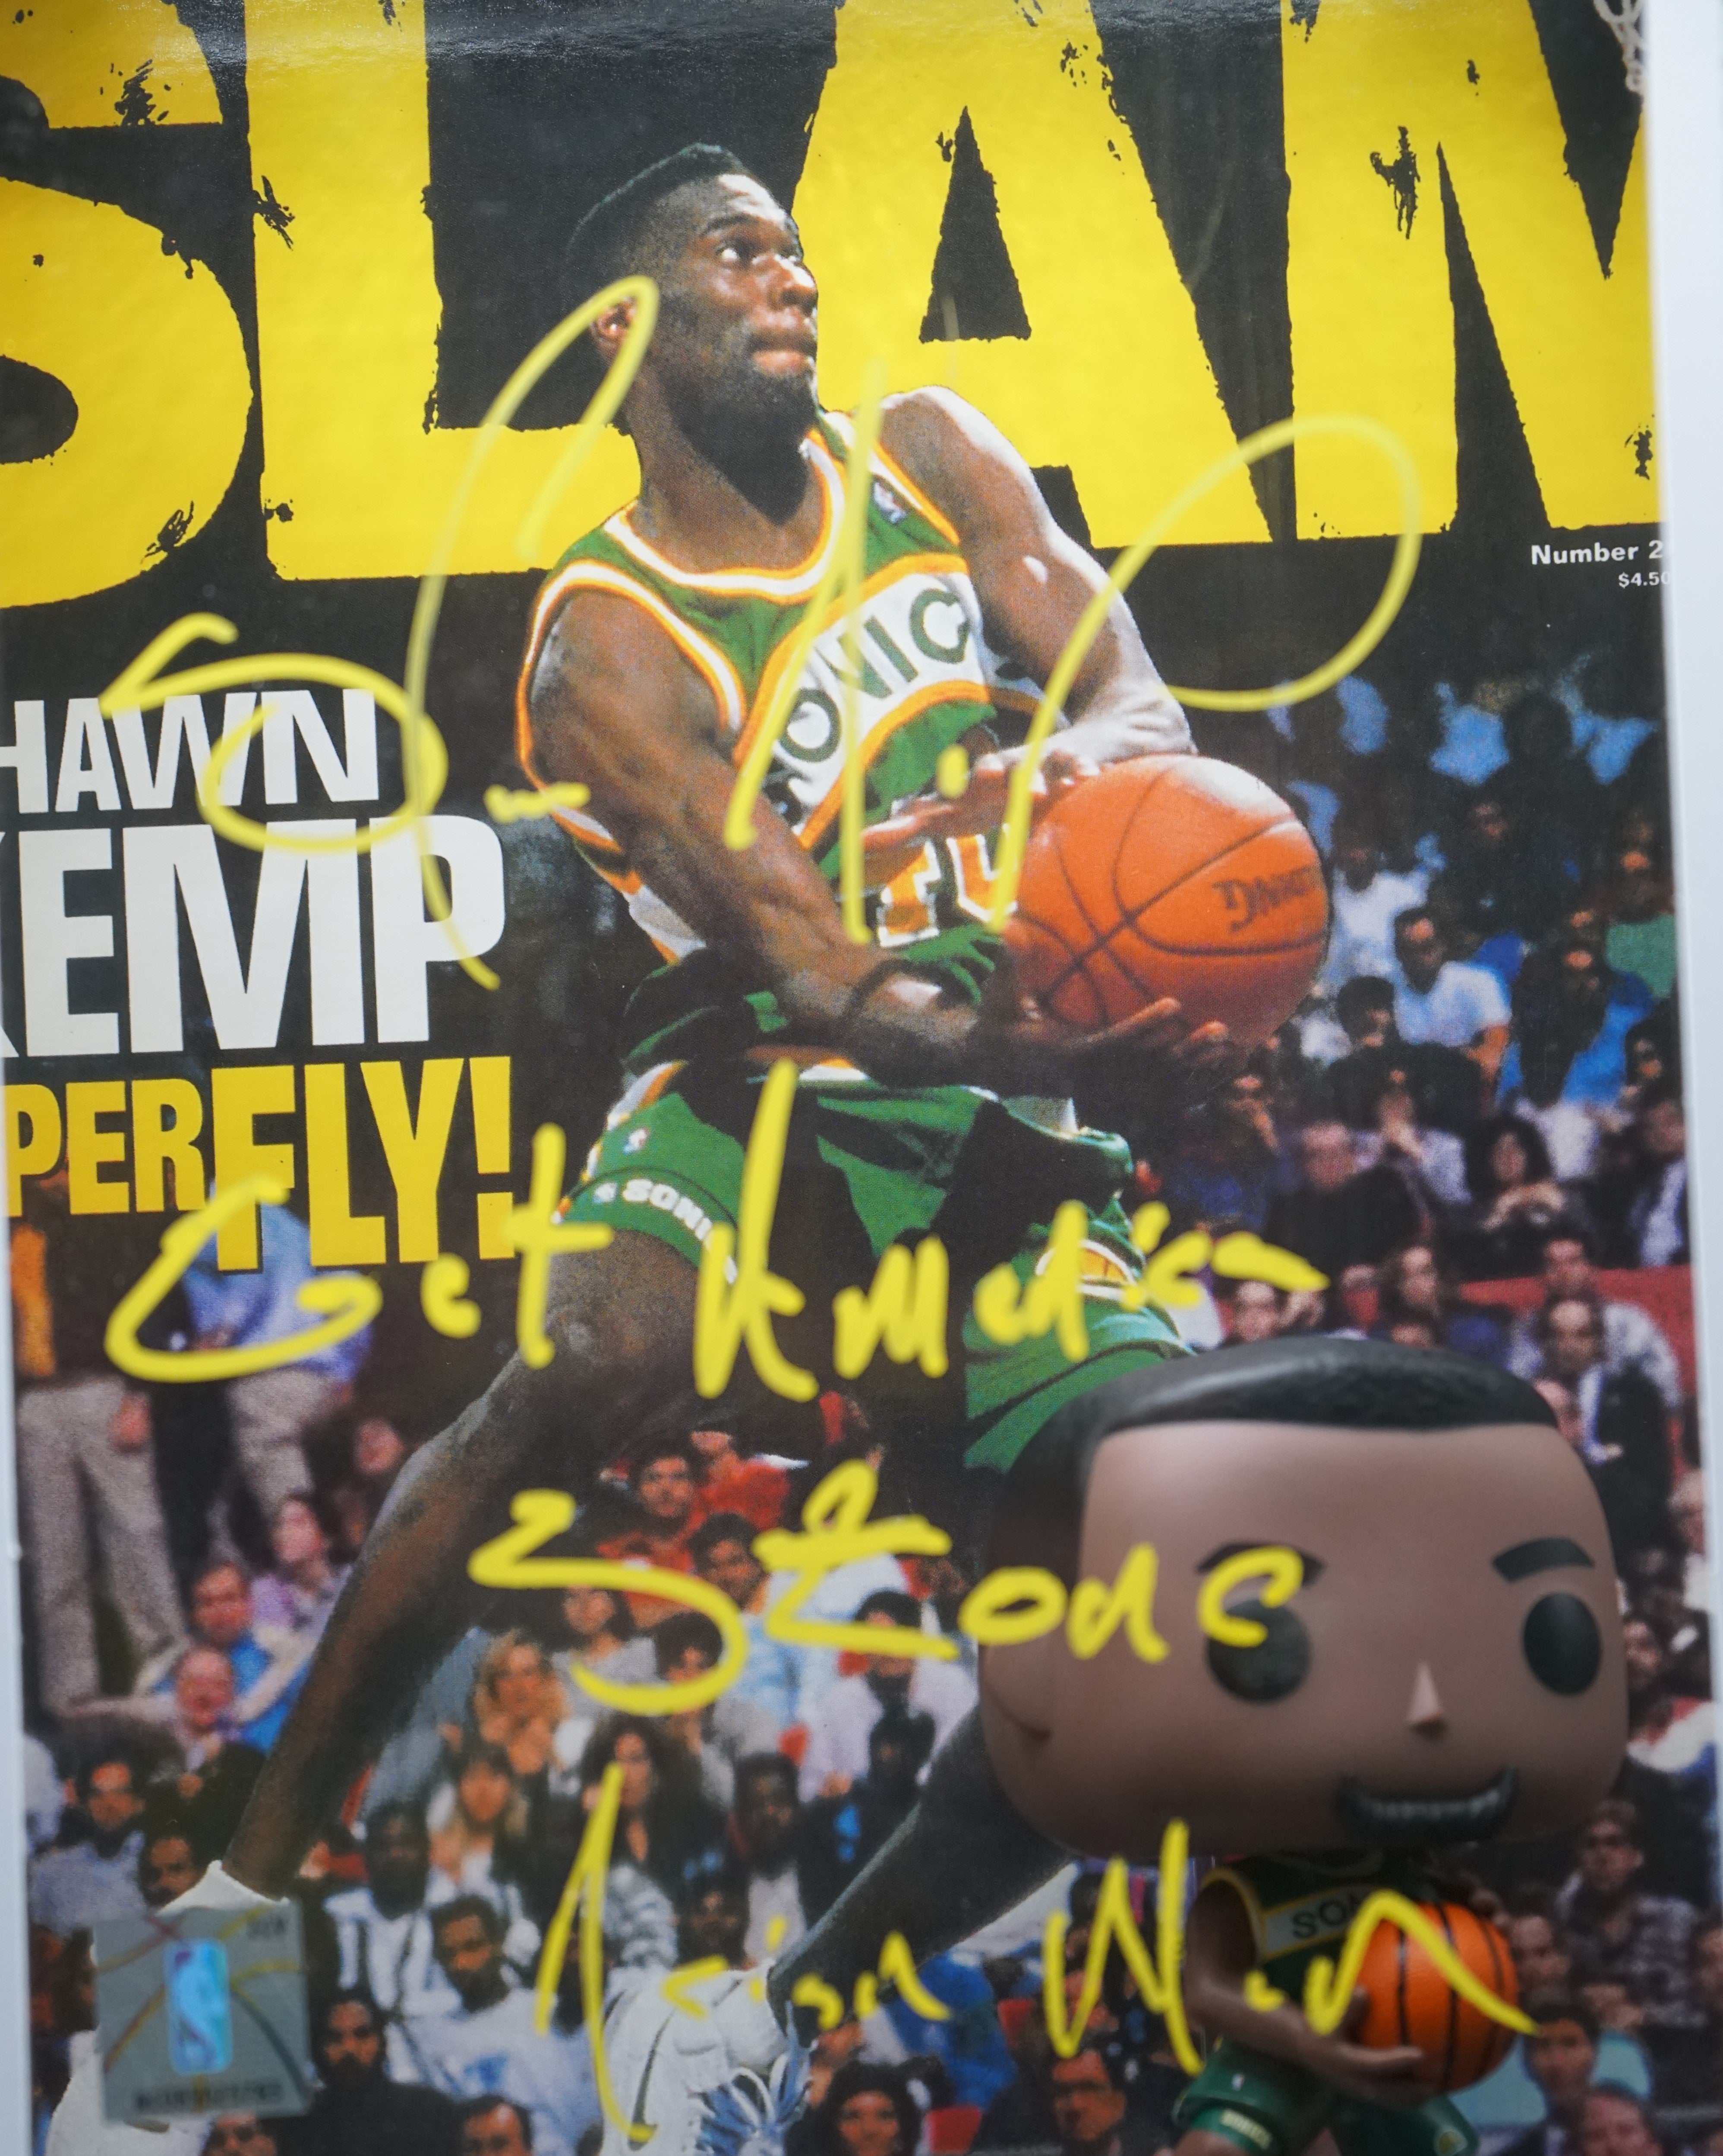 Slam Funko Pop #07 Signed by Shawn Kemp with Inscription "Get America Stoned"